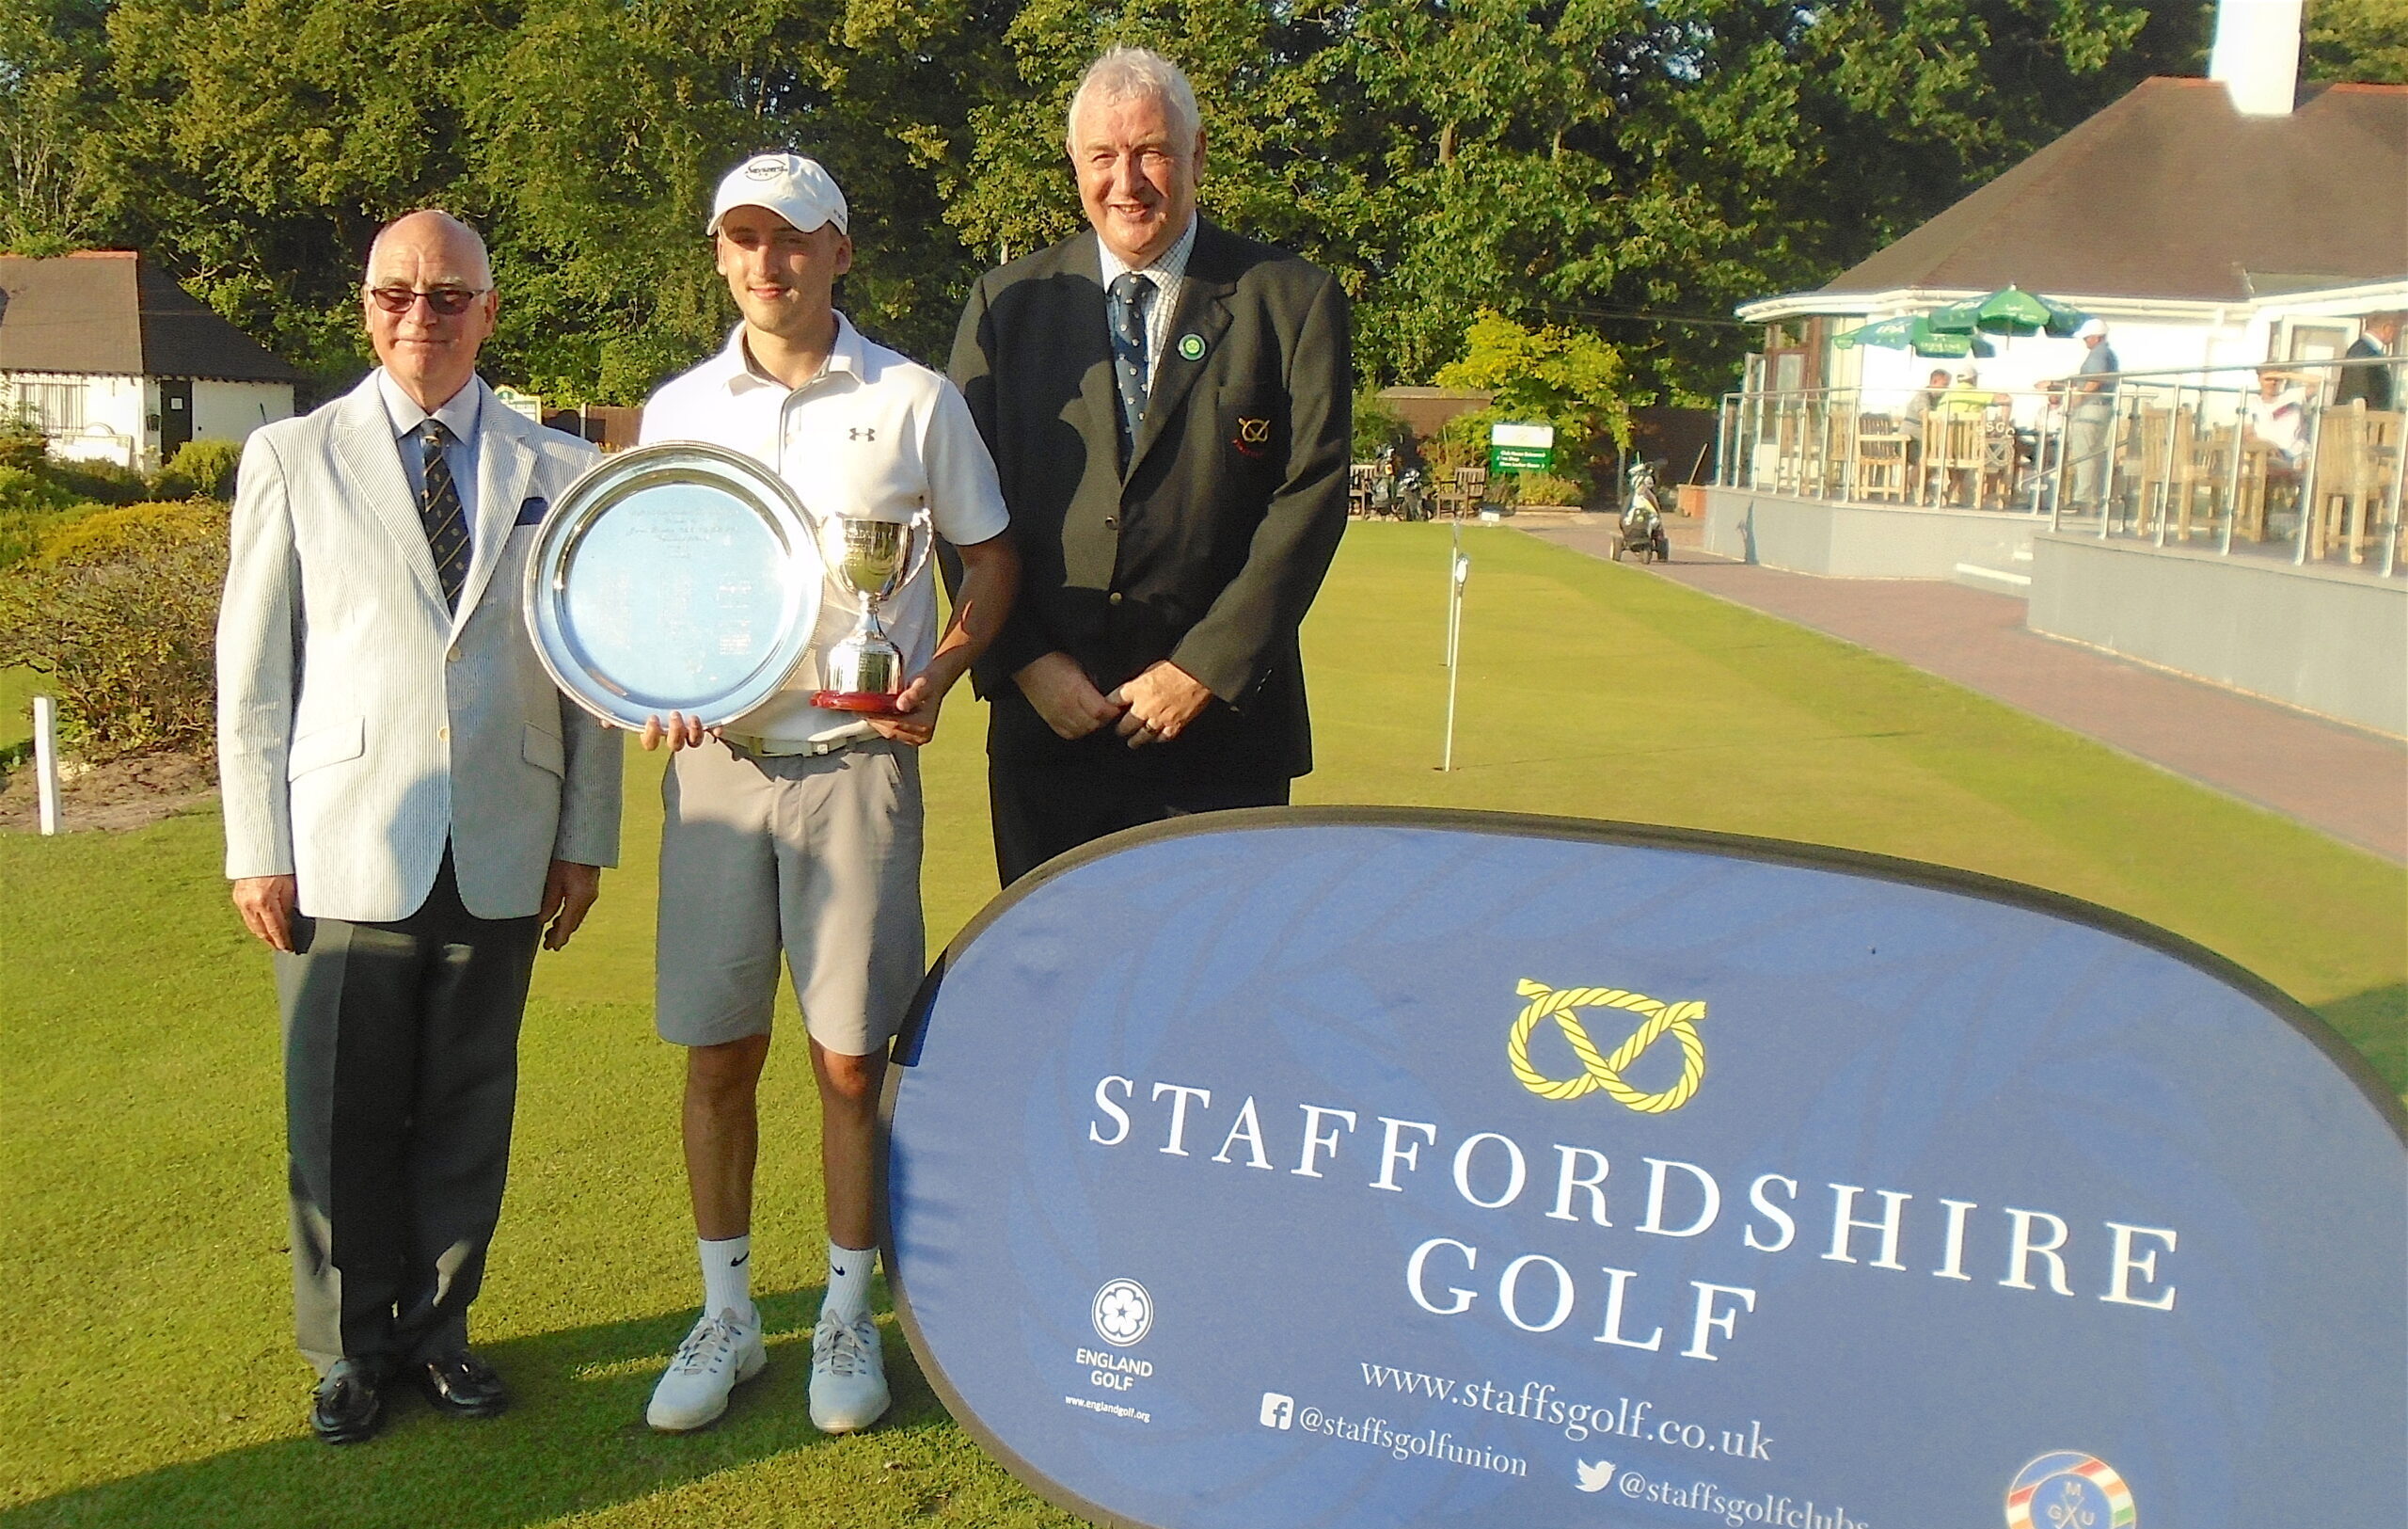 Ollie Read is presented with the County Championship trophy and the Youths prize (U-22s) by Frank Wilson (South Staffs GC President) and Michael Entecott (SUGC President)